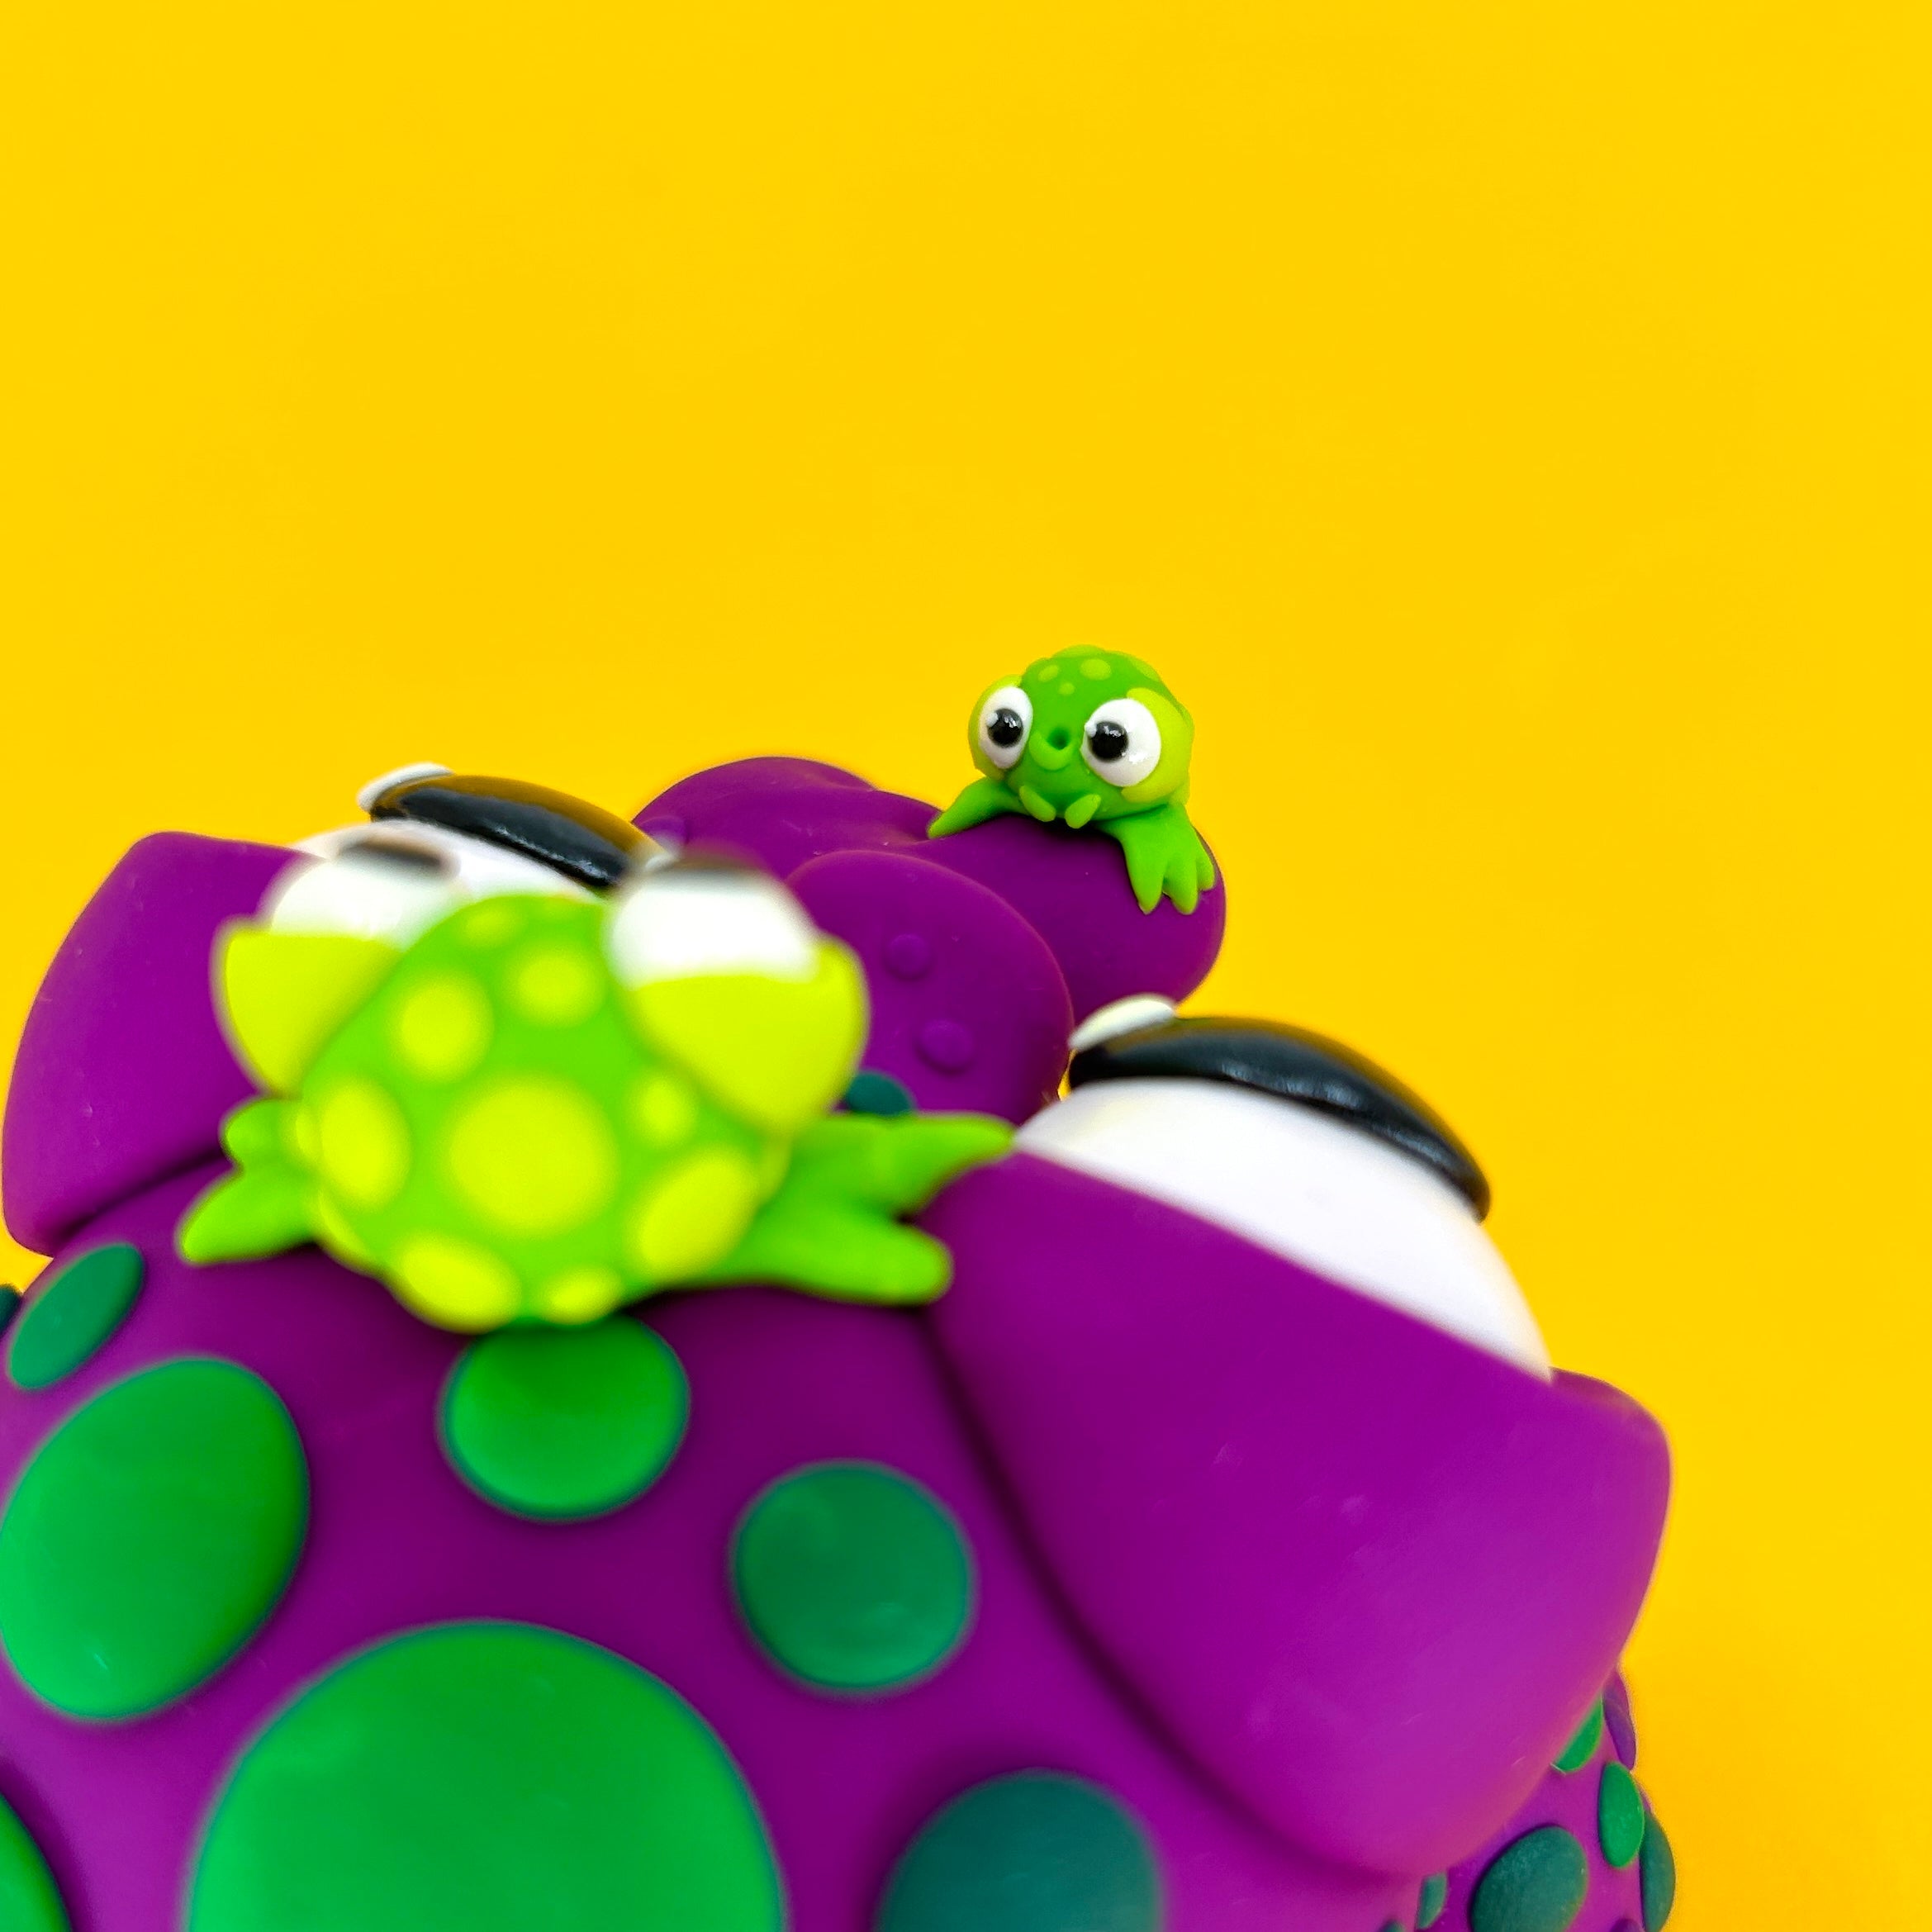 Close-up of a toy frog from Simon Says Macy & Friends - IT'S STICKY! surrounded by cake decorating supplies.